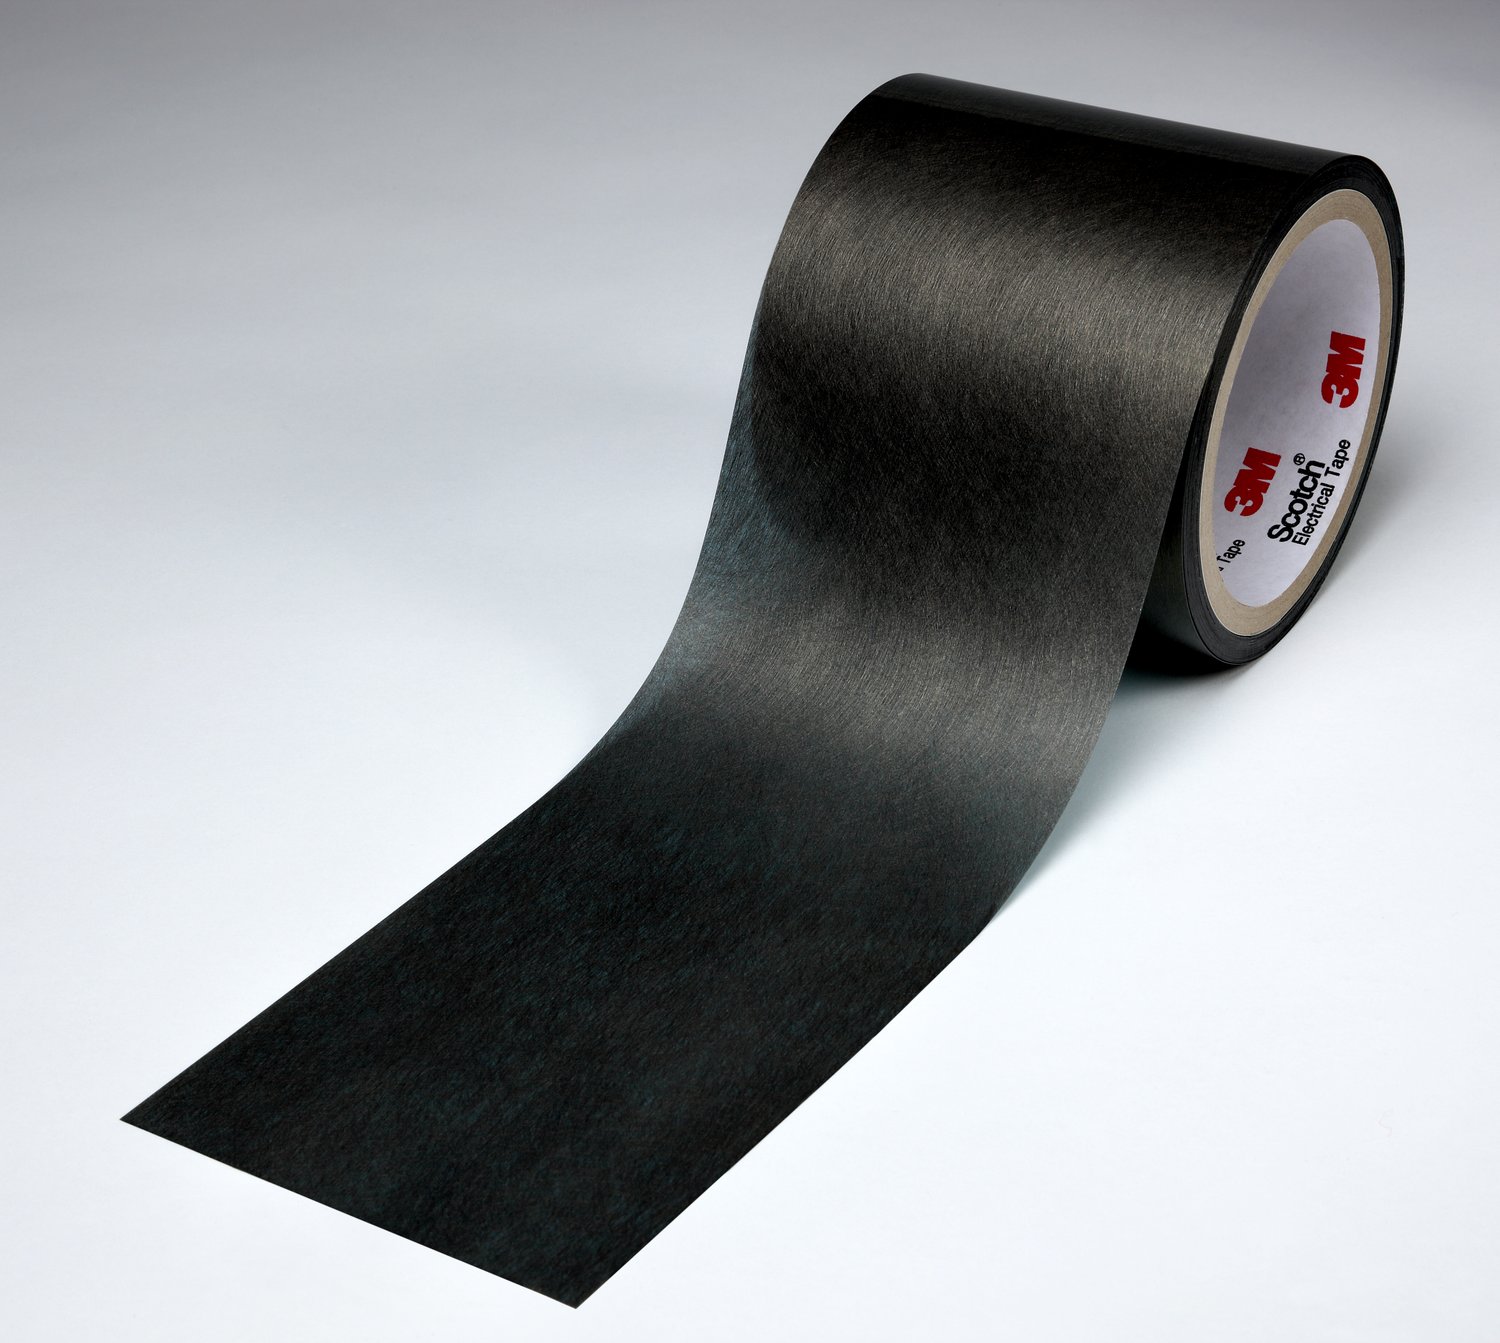 7000008577 - 3M Electrically Conductive Double-Sided Tape 9723, 500 mm x 100 m